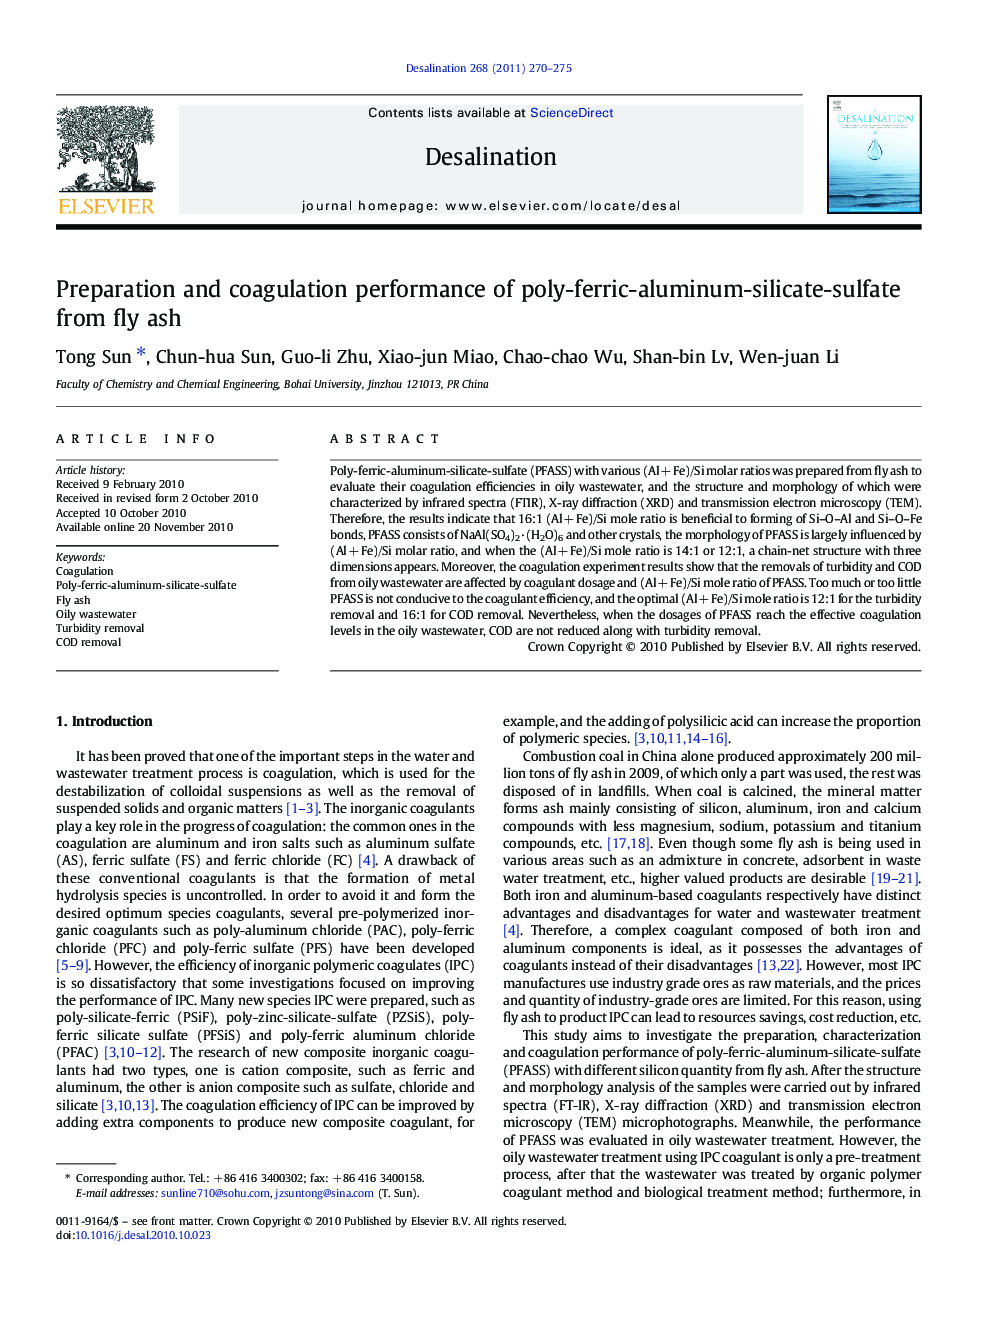 Preparation and coagulation performance of poly-ferric-aluminum-silicate-sulfate from fly ash